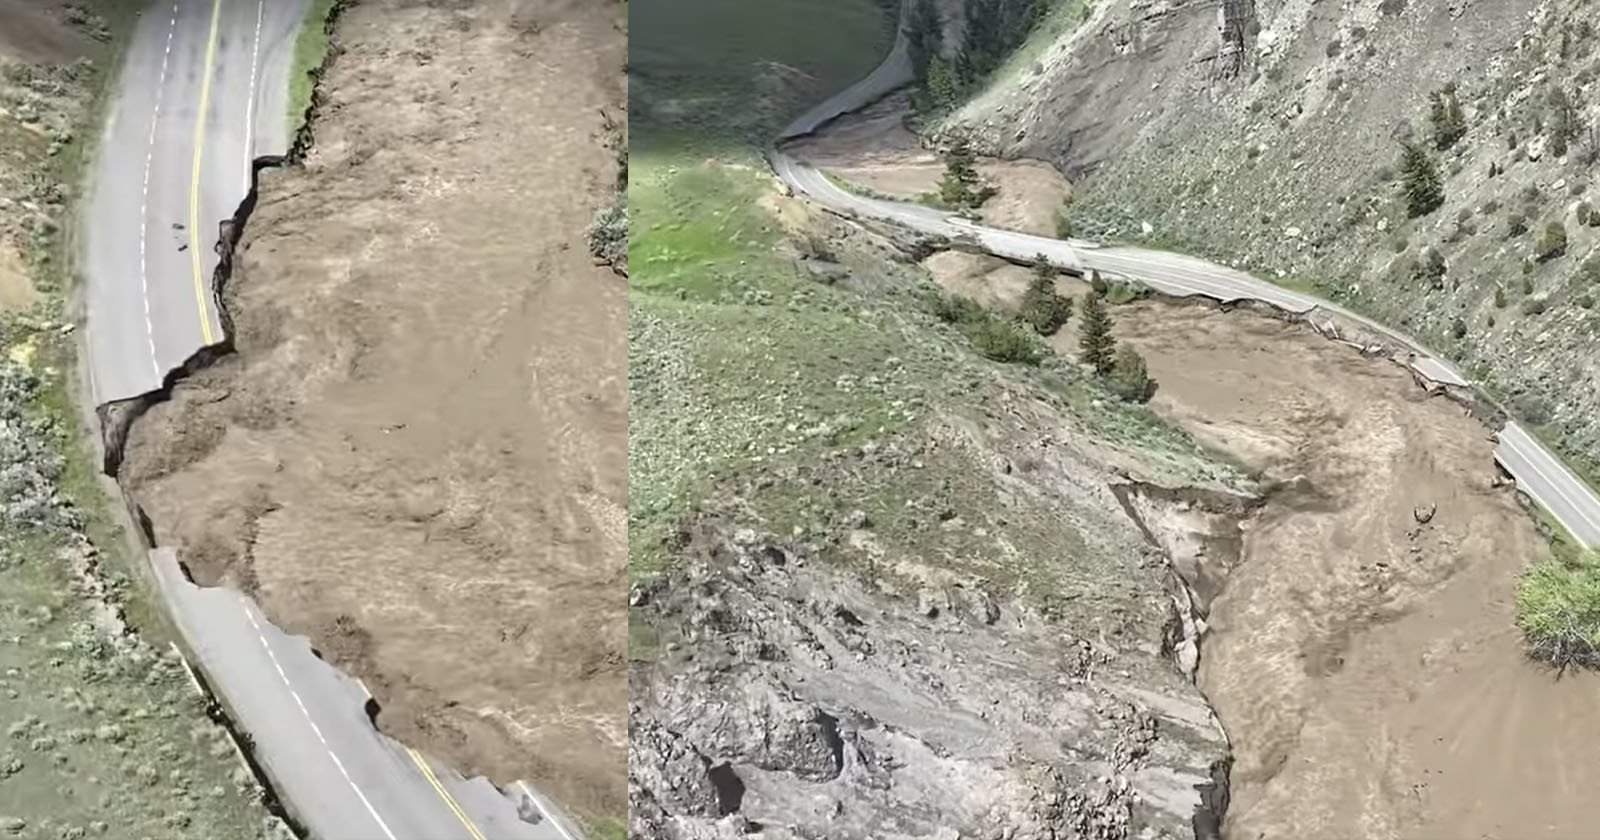  aerial footage shows devastating flooding yellowstone national park 